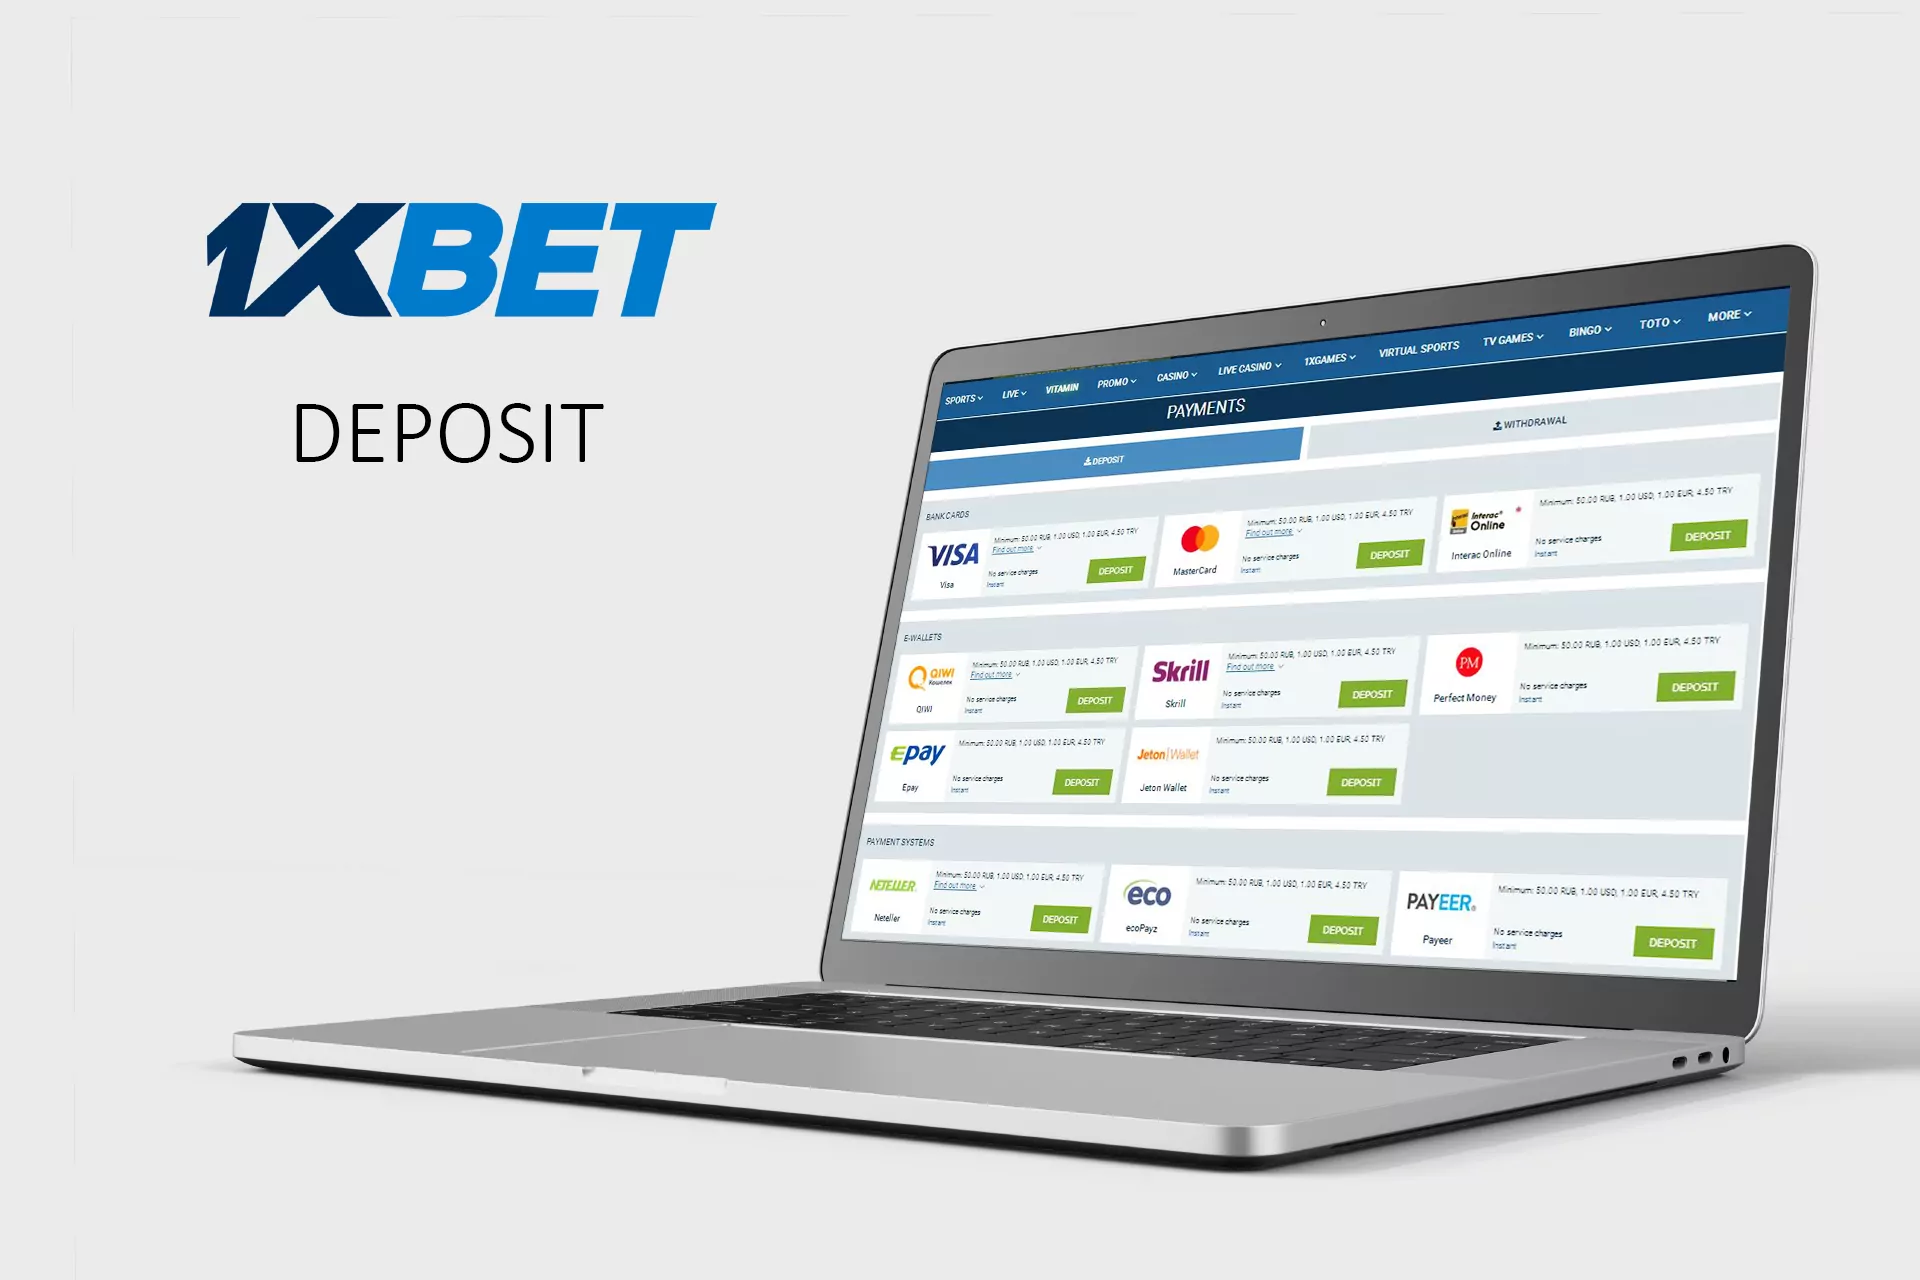 Top up your betting account using any payment system.